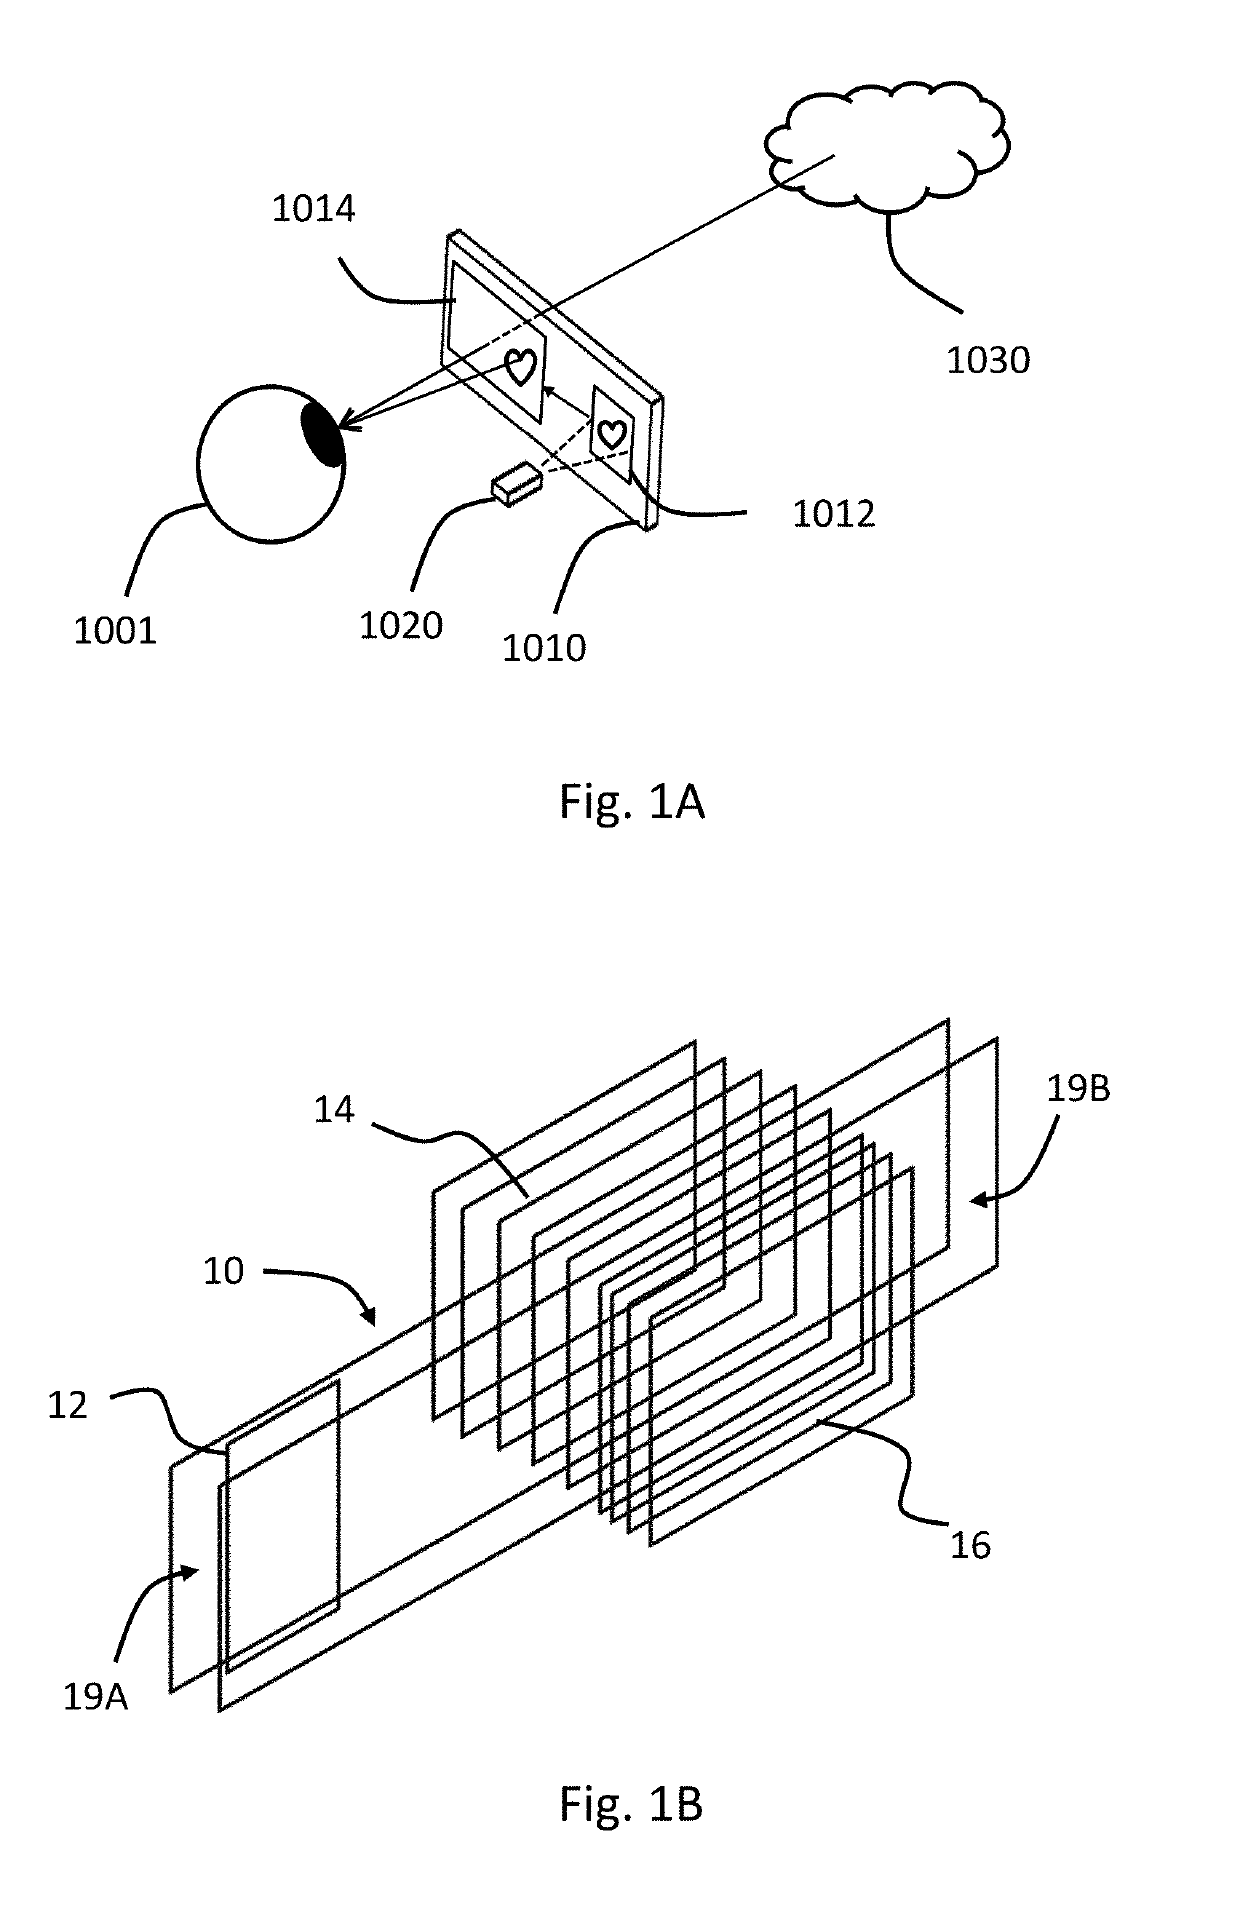 Optical see-through display element and device utilizing such element